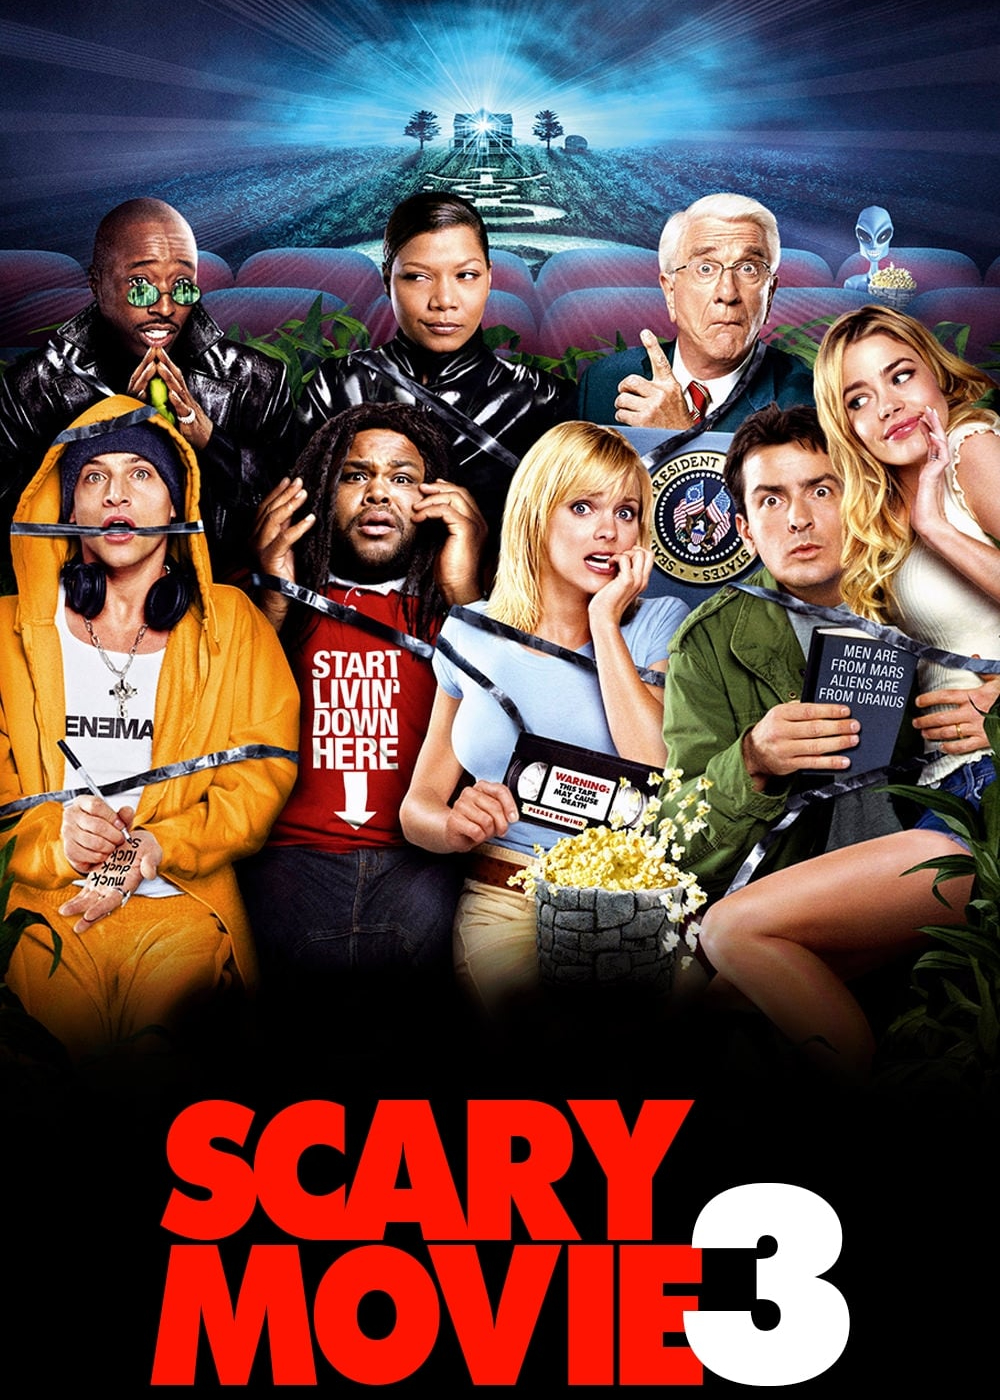 Poster Phim Phim Kinh Dị 3 (Scary Movie 3)